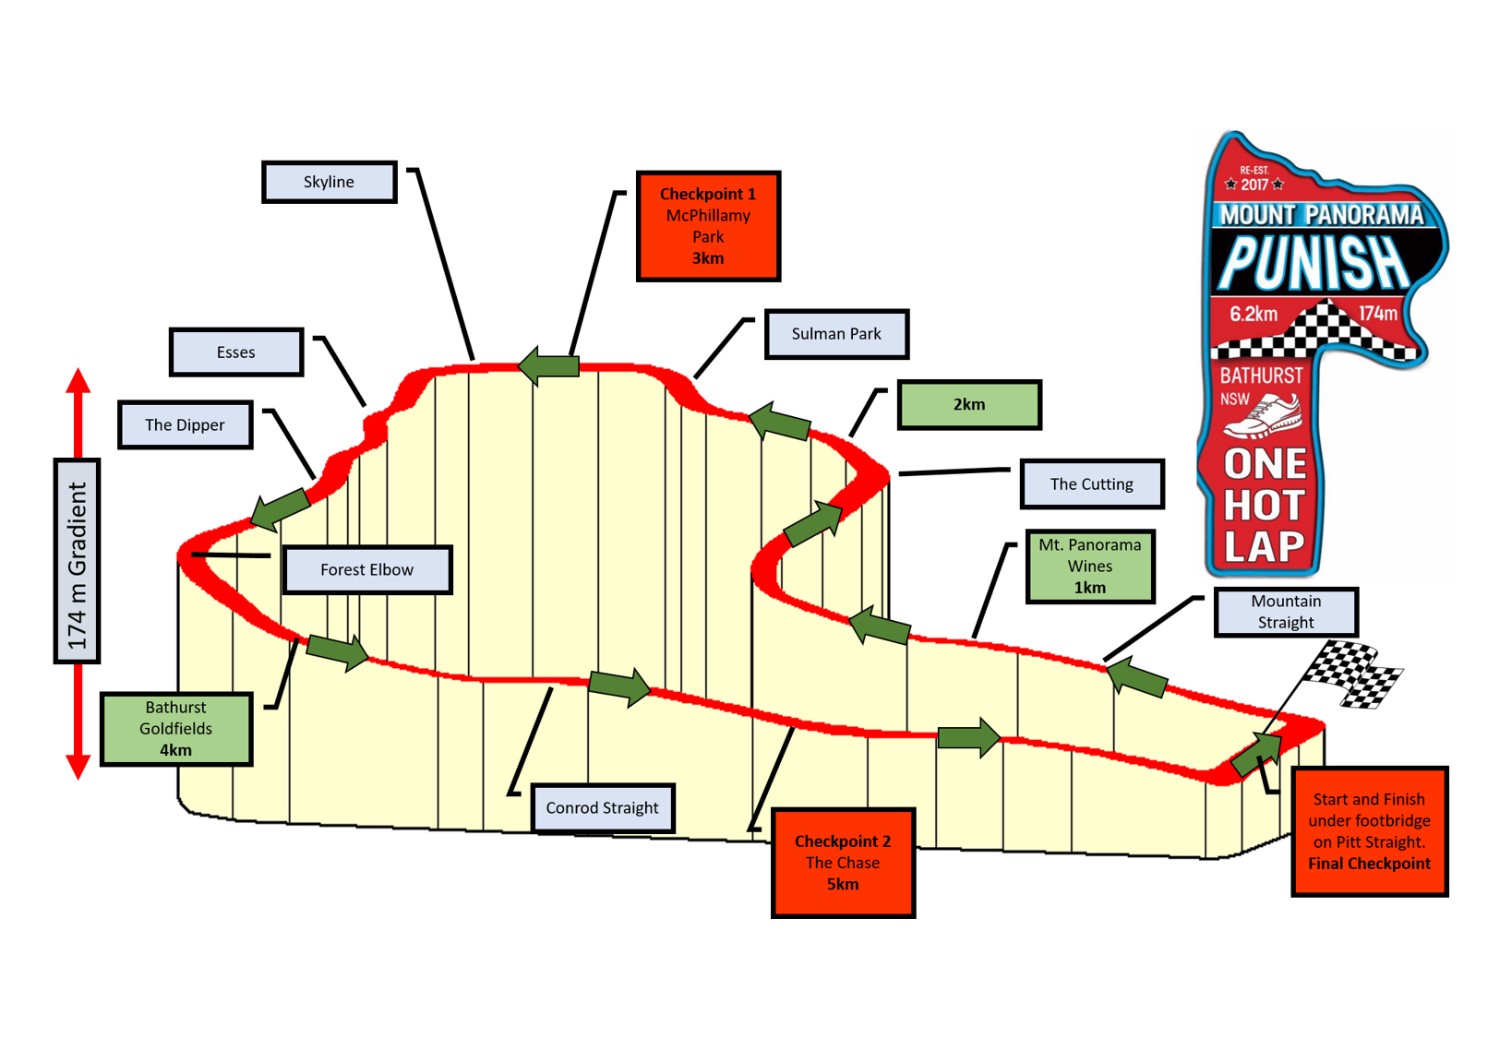 The Mt. Panorama circuit is known for its huge elevation change